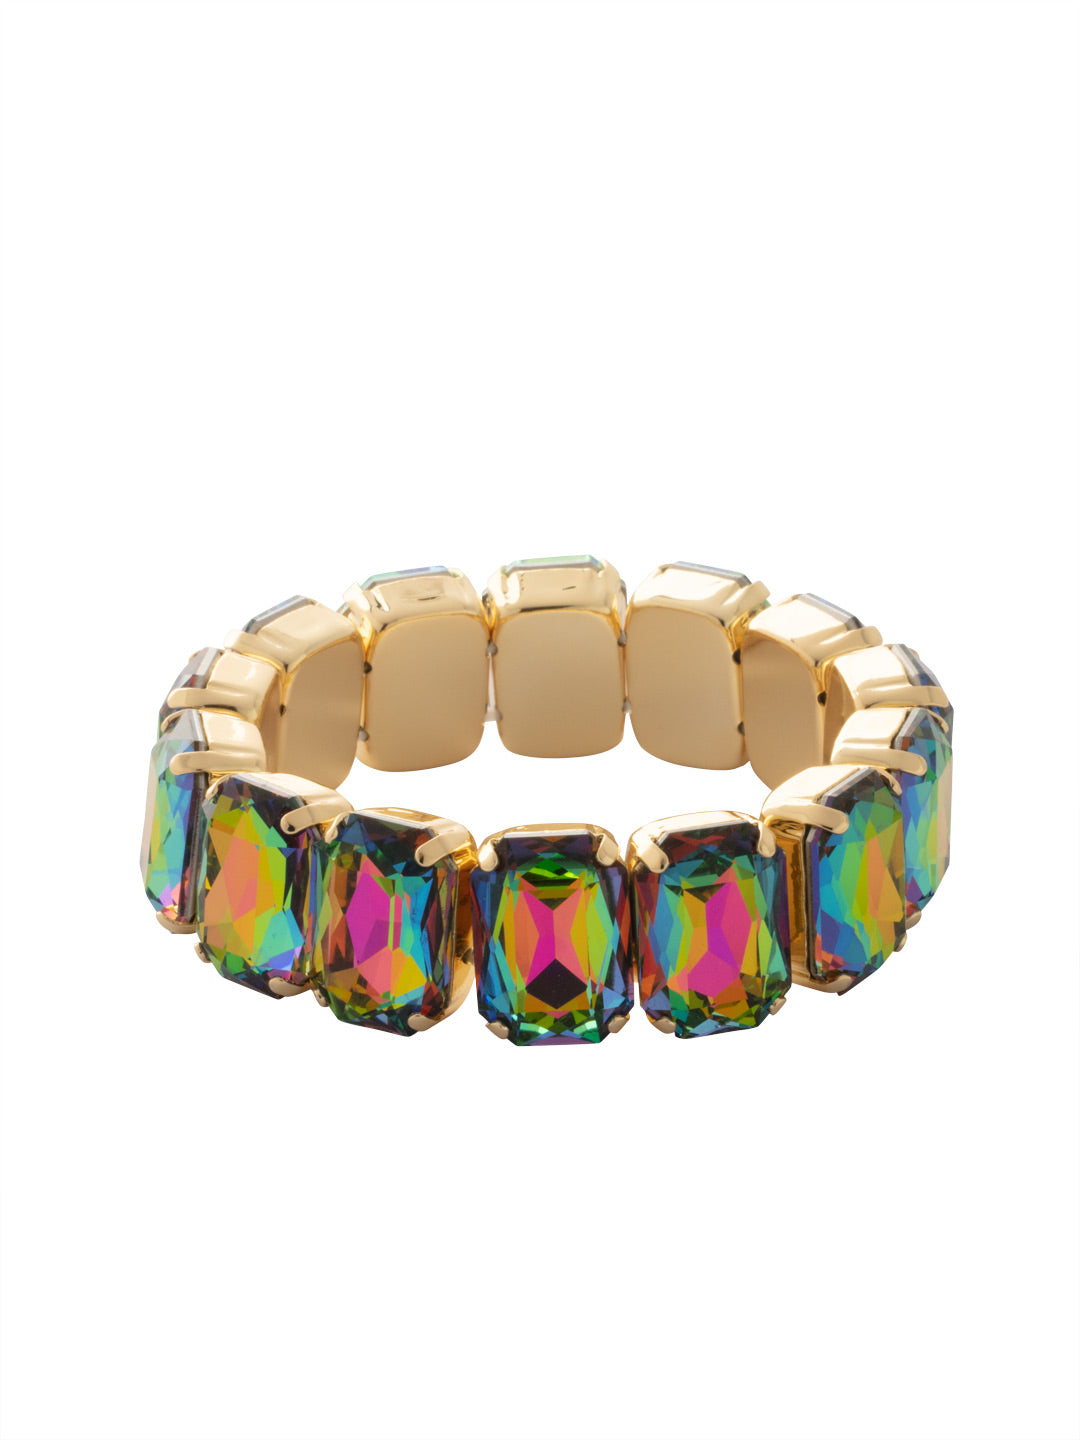 Emerald Cut Stretch Bracelet - 4BFF70BGVO - <p>The Emerald Cut Stretch Bracelet features repeating emerald cut crystals on a multi-layered stretchy jewelry filament, creating a durable and trendy statement piece. From Sorrelli's Volcano collection in our Bright Gold-tone finish.</p>